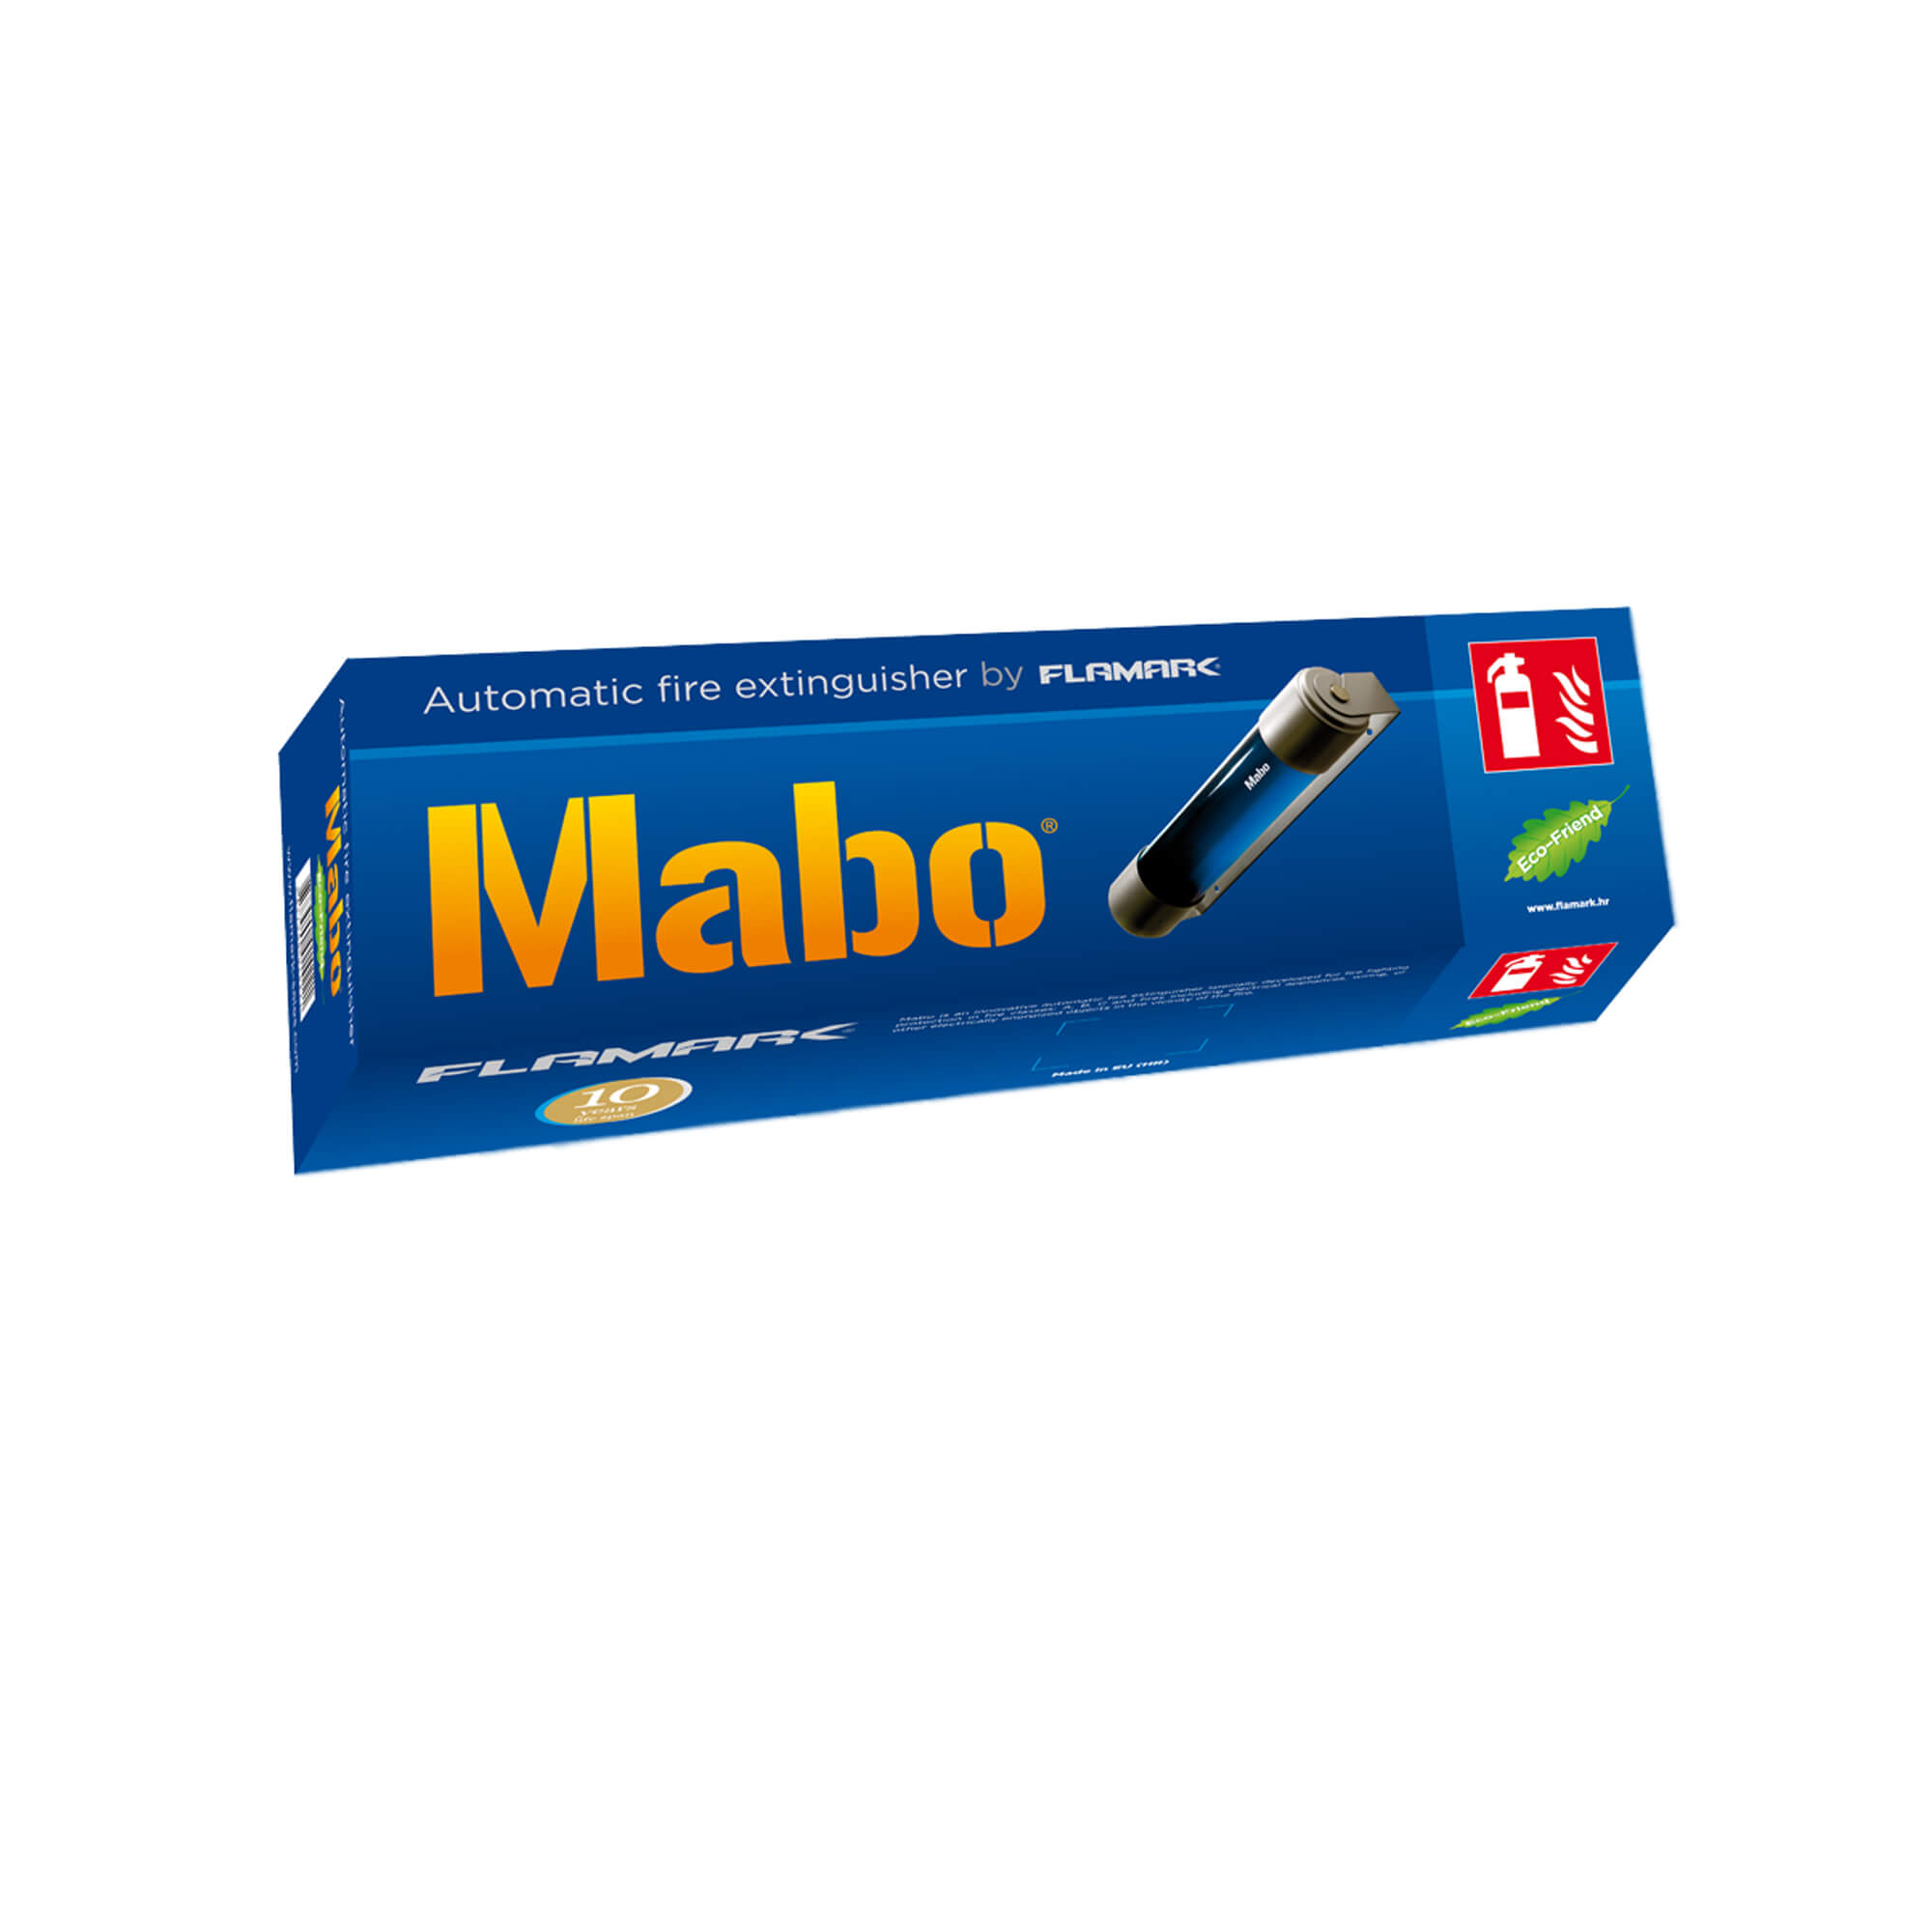 Automatic fire extinguisher Mabo, 580 ml